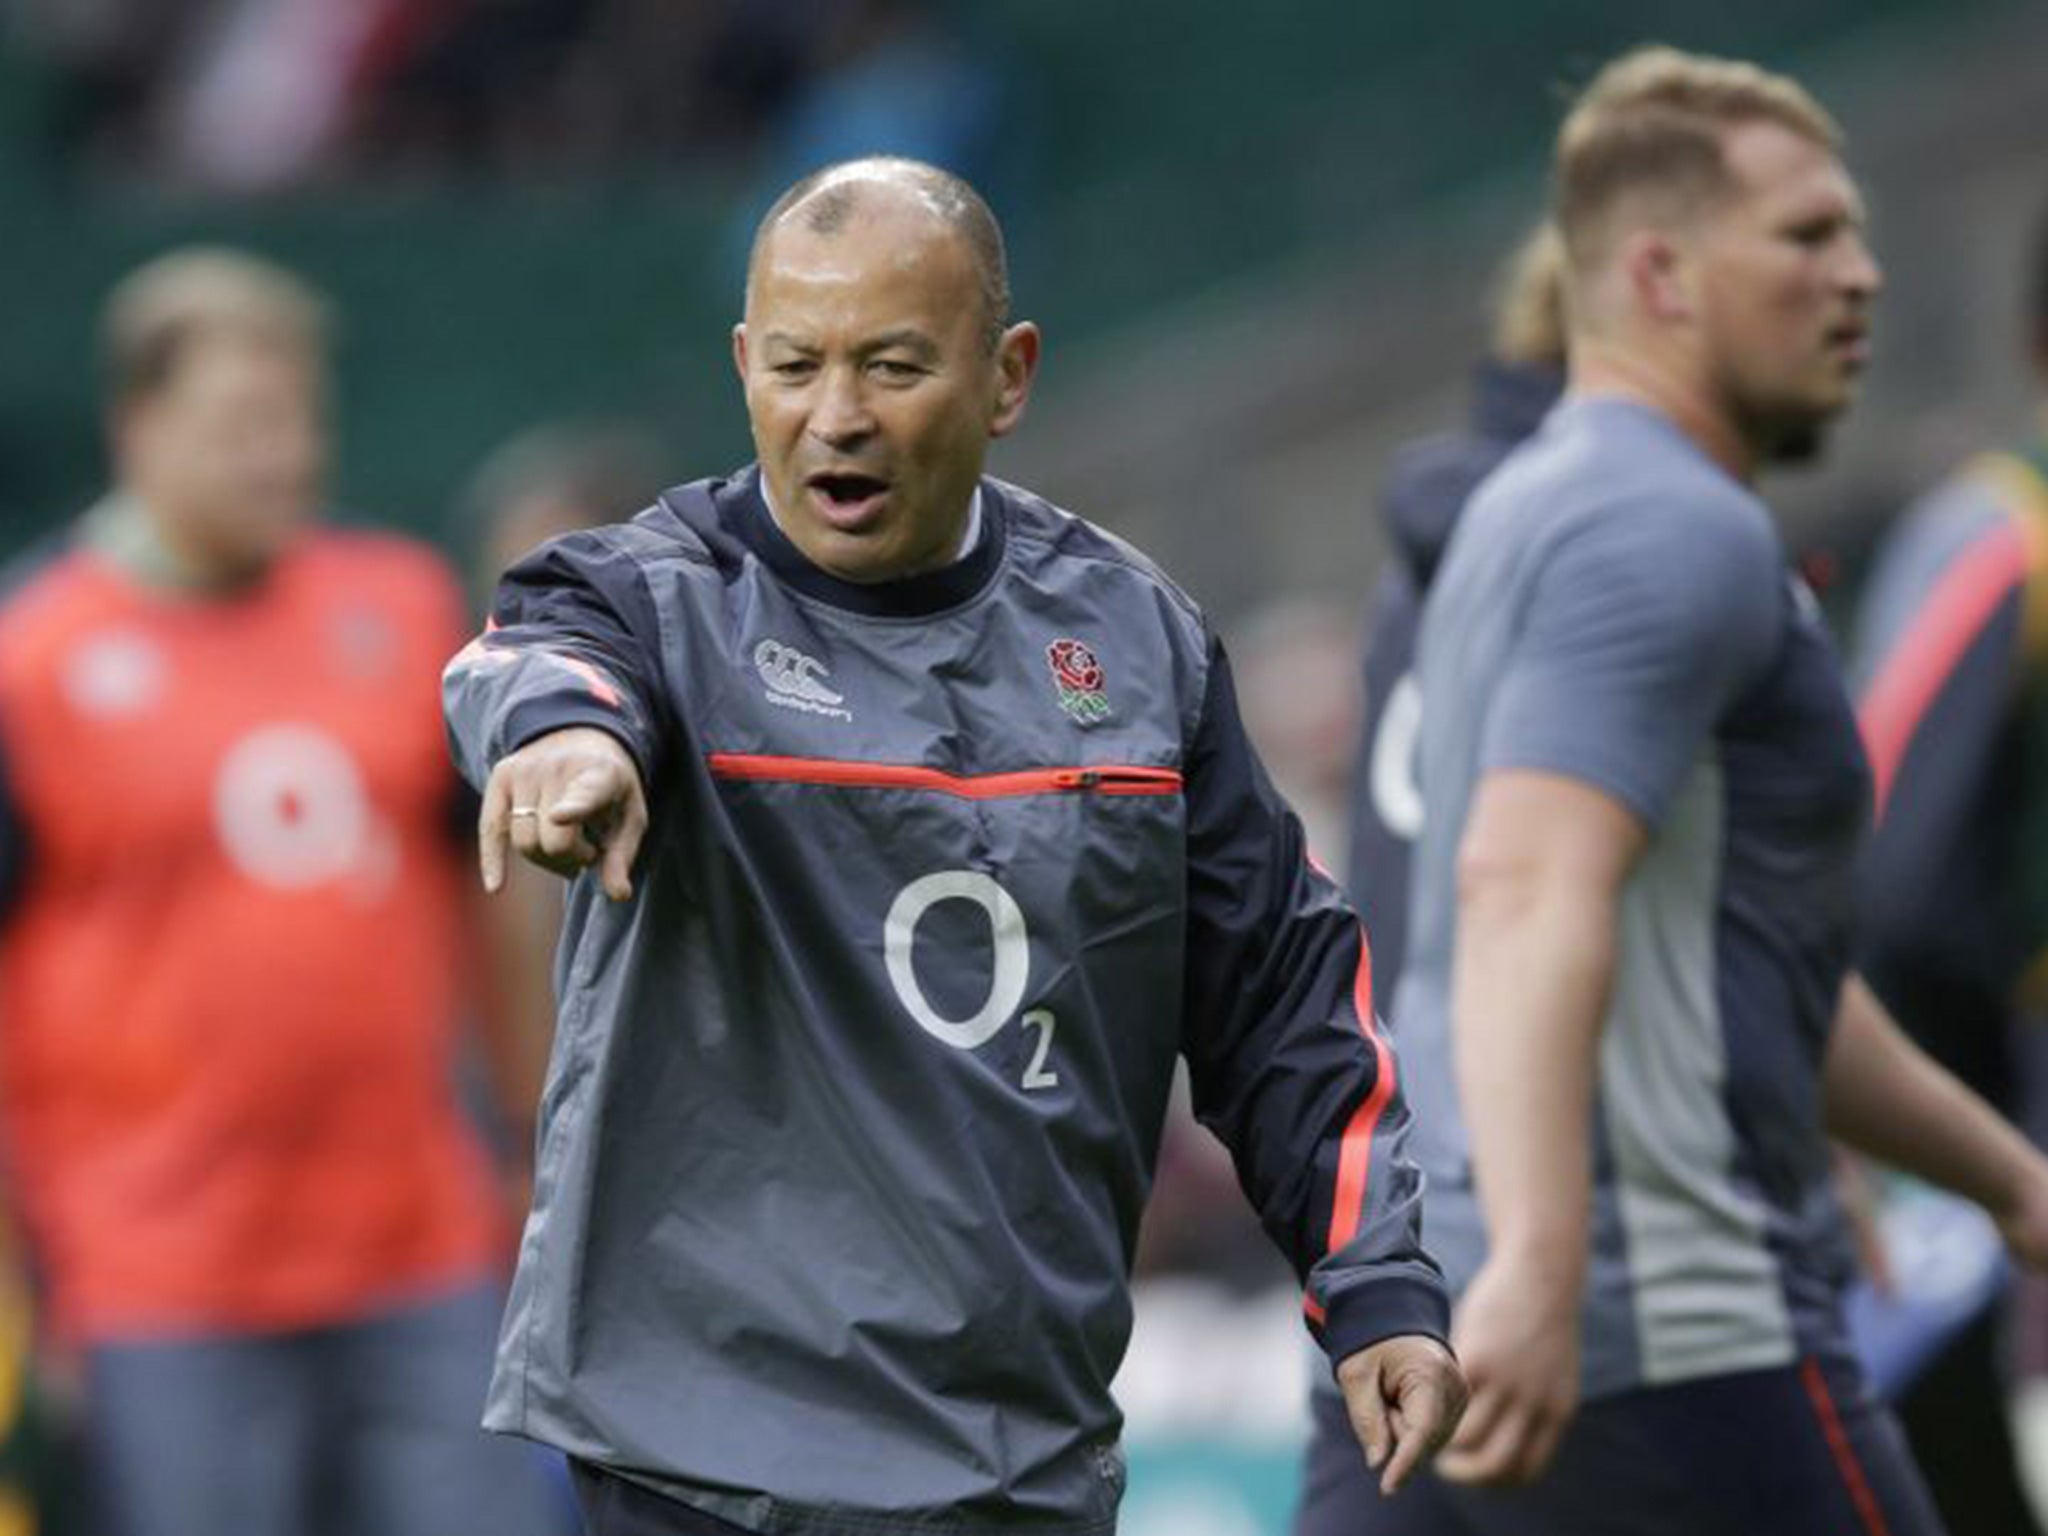 Eddie Jones wants England to build on there 37-21 win over South Africa